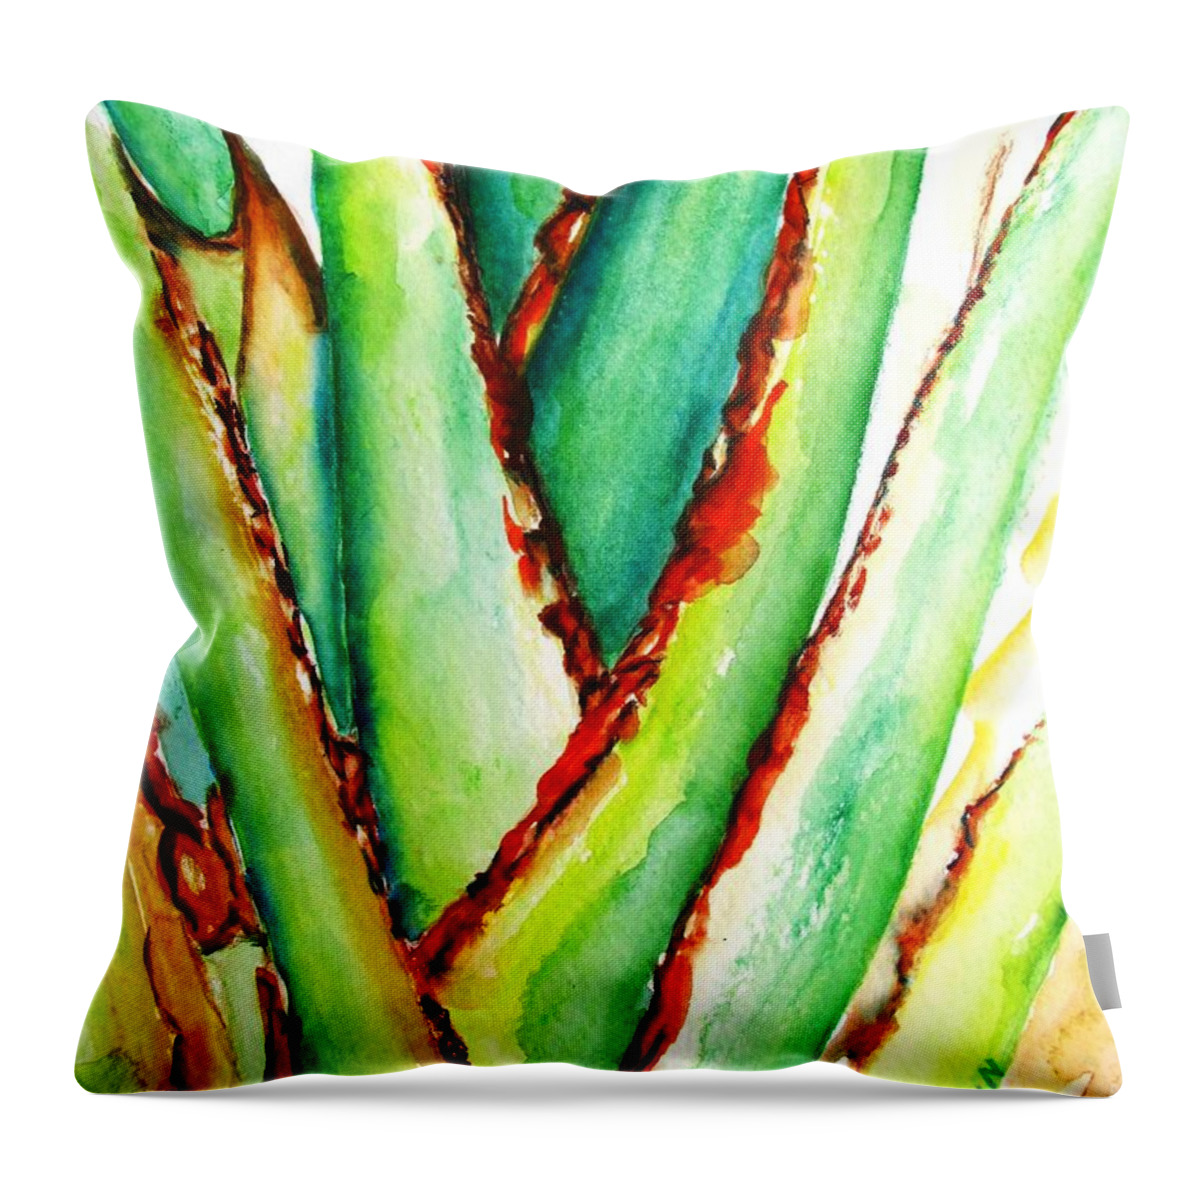 Travelers Palm Throw Pillow featuring the painting Travelers Palm Trunk #1 by Carlin Blahnik CarlinArtWatercolor